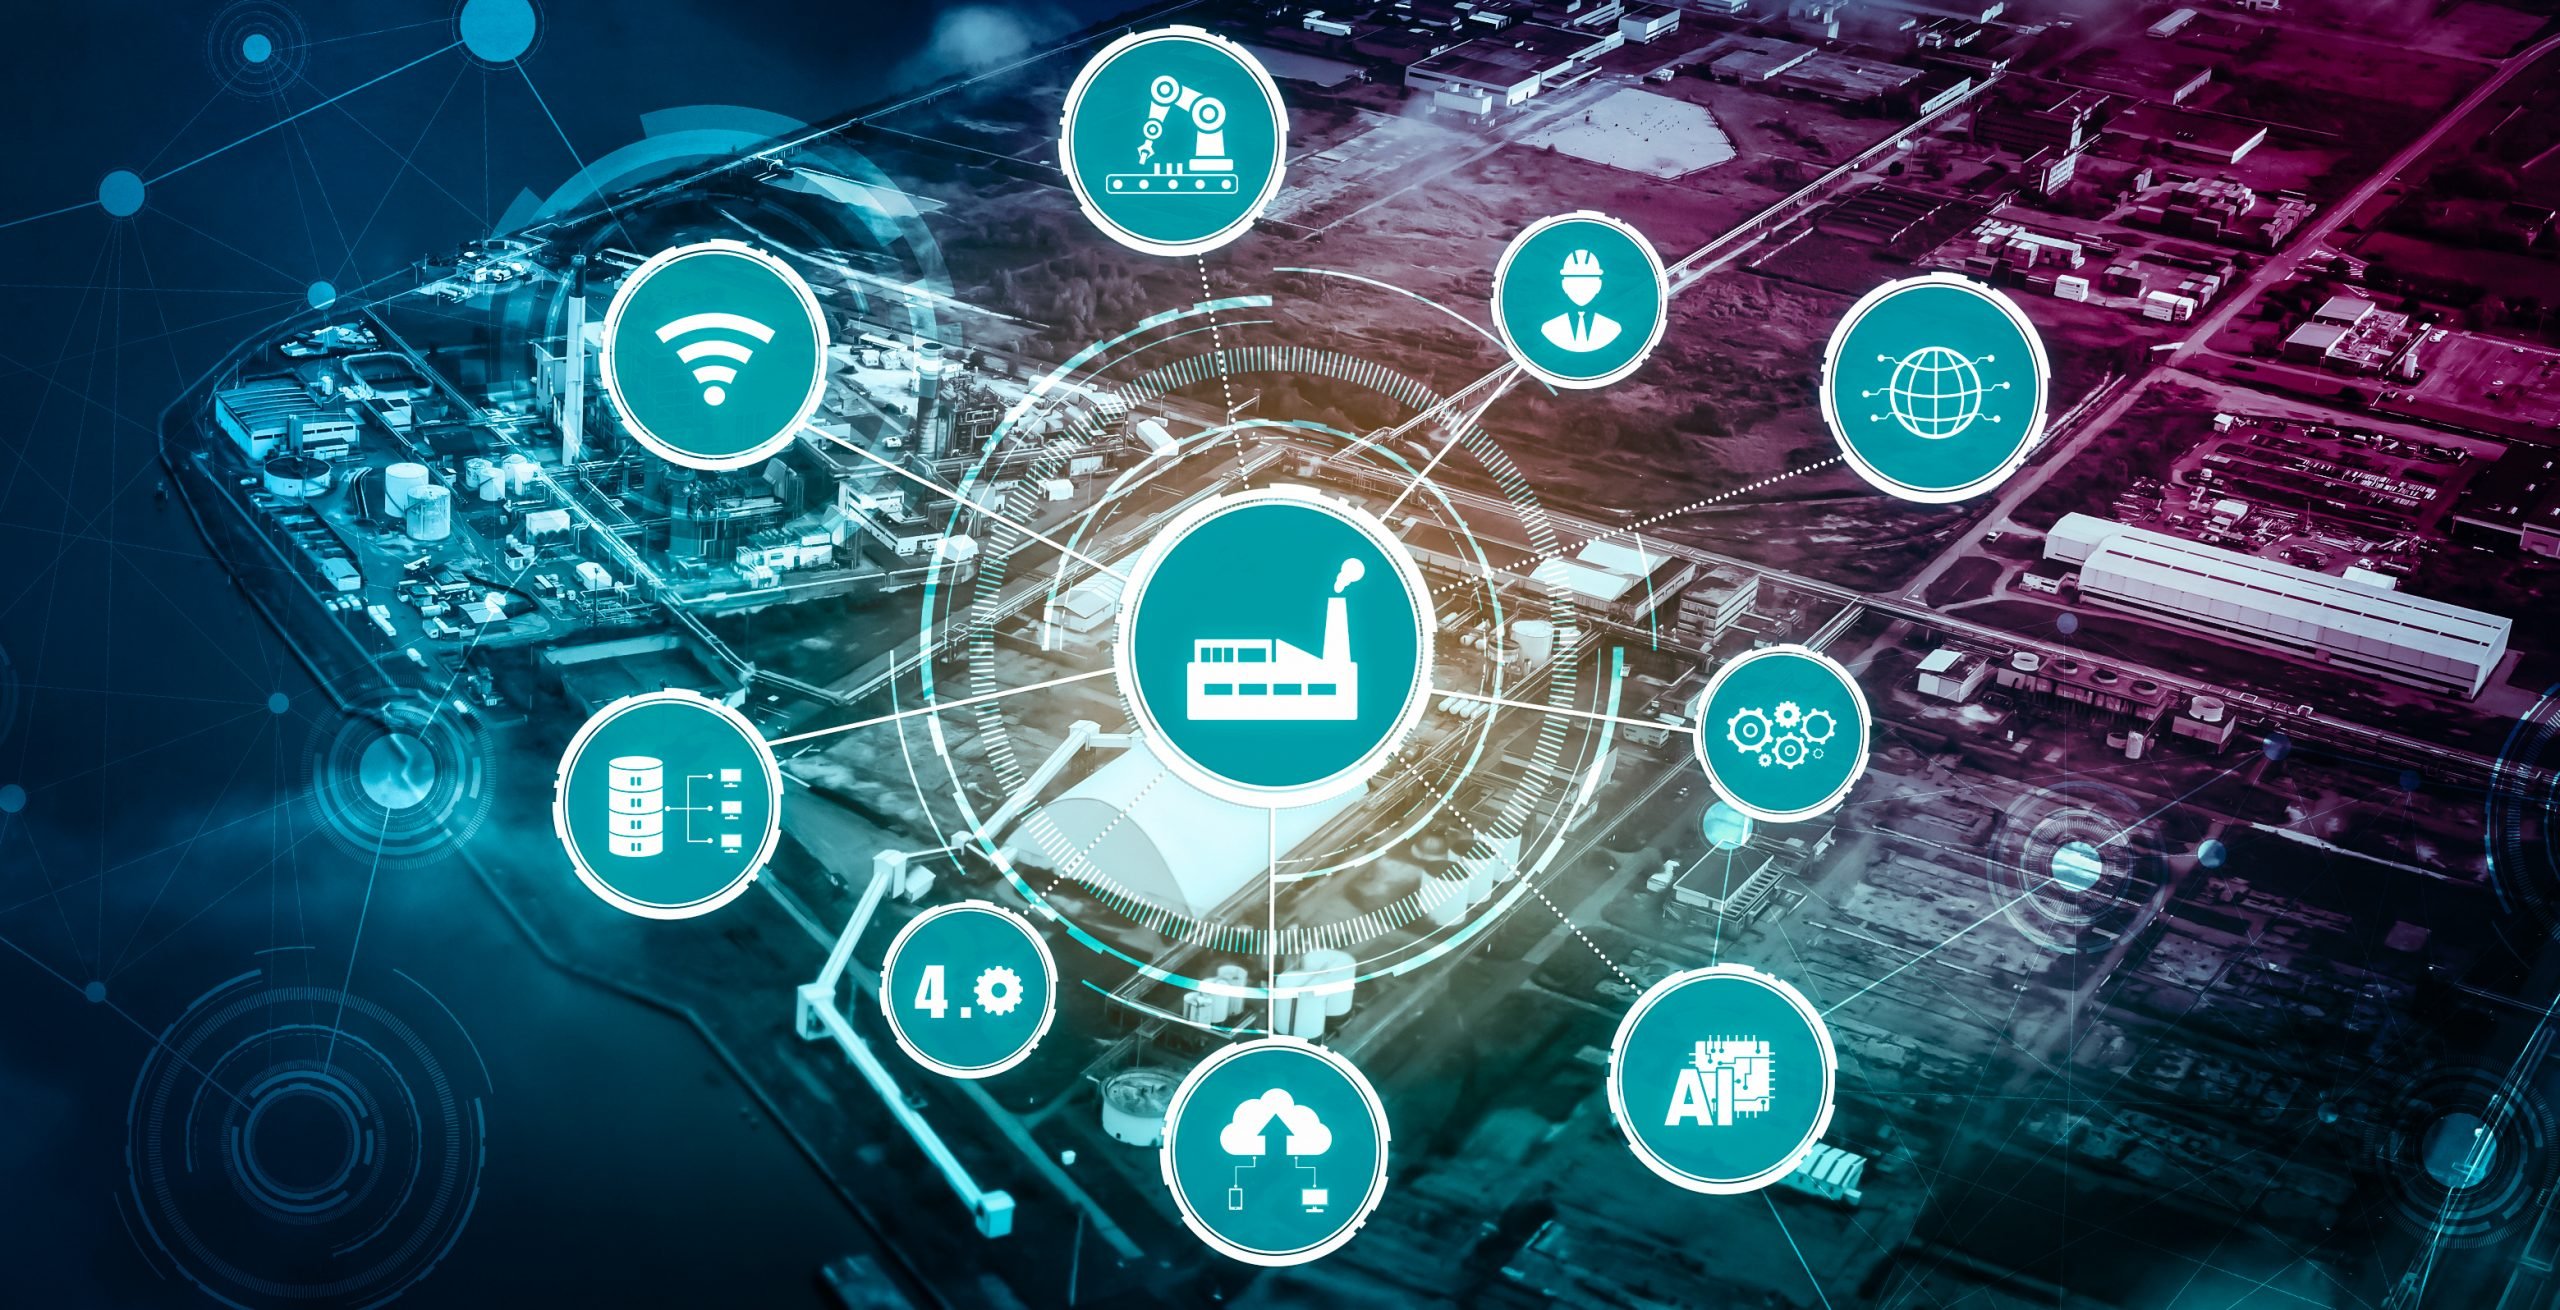 Industry 4.0 becomes a reality in everyday industrial life